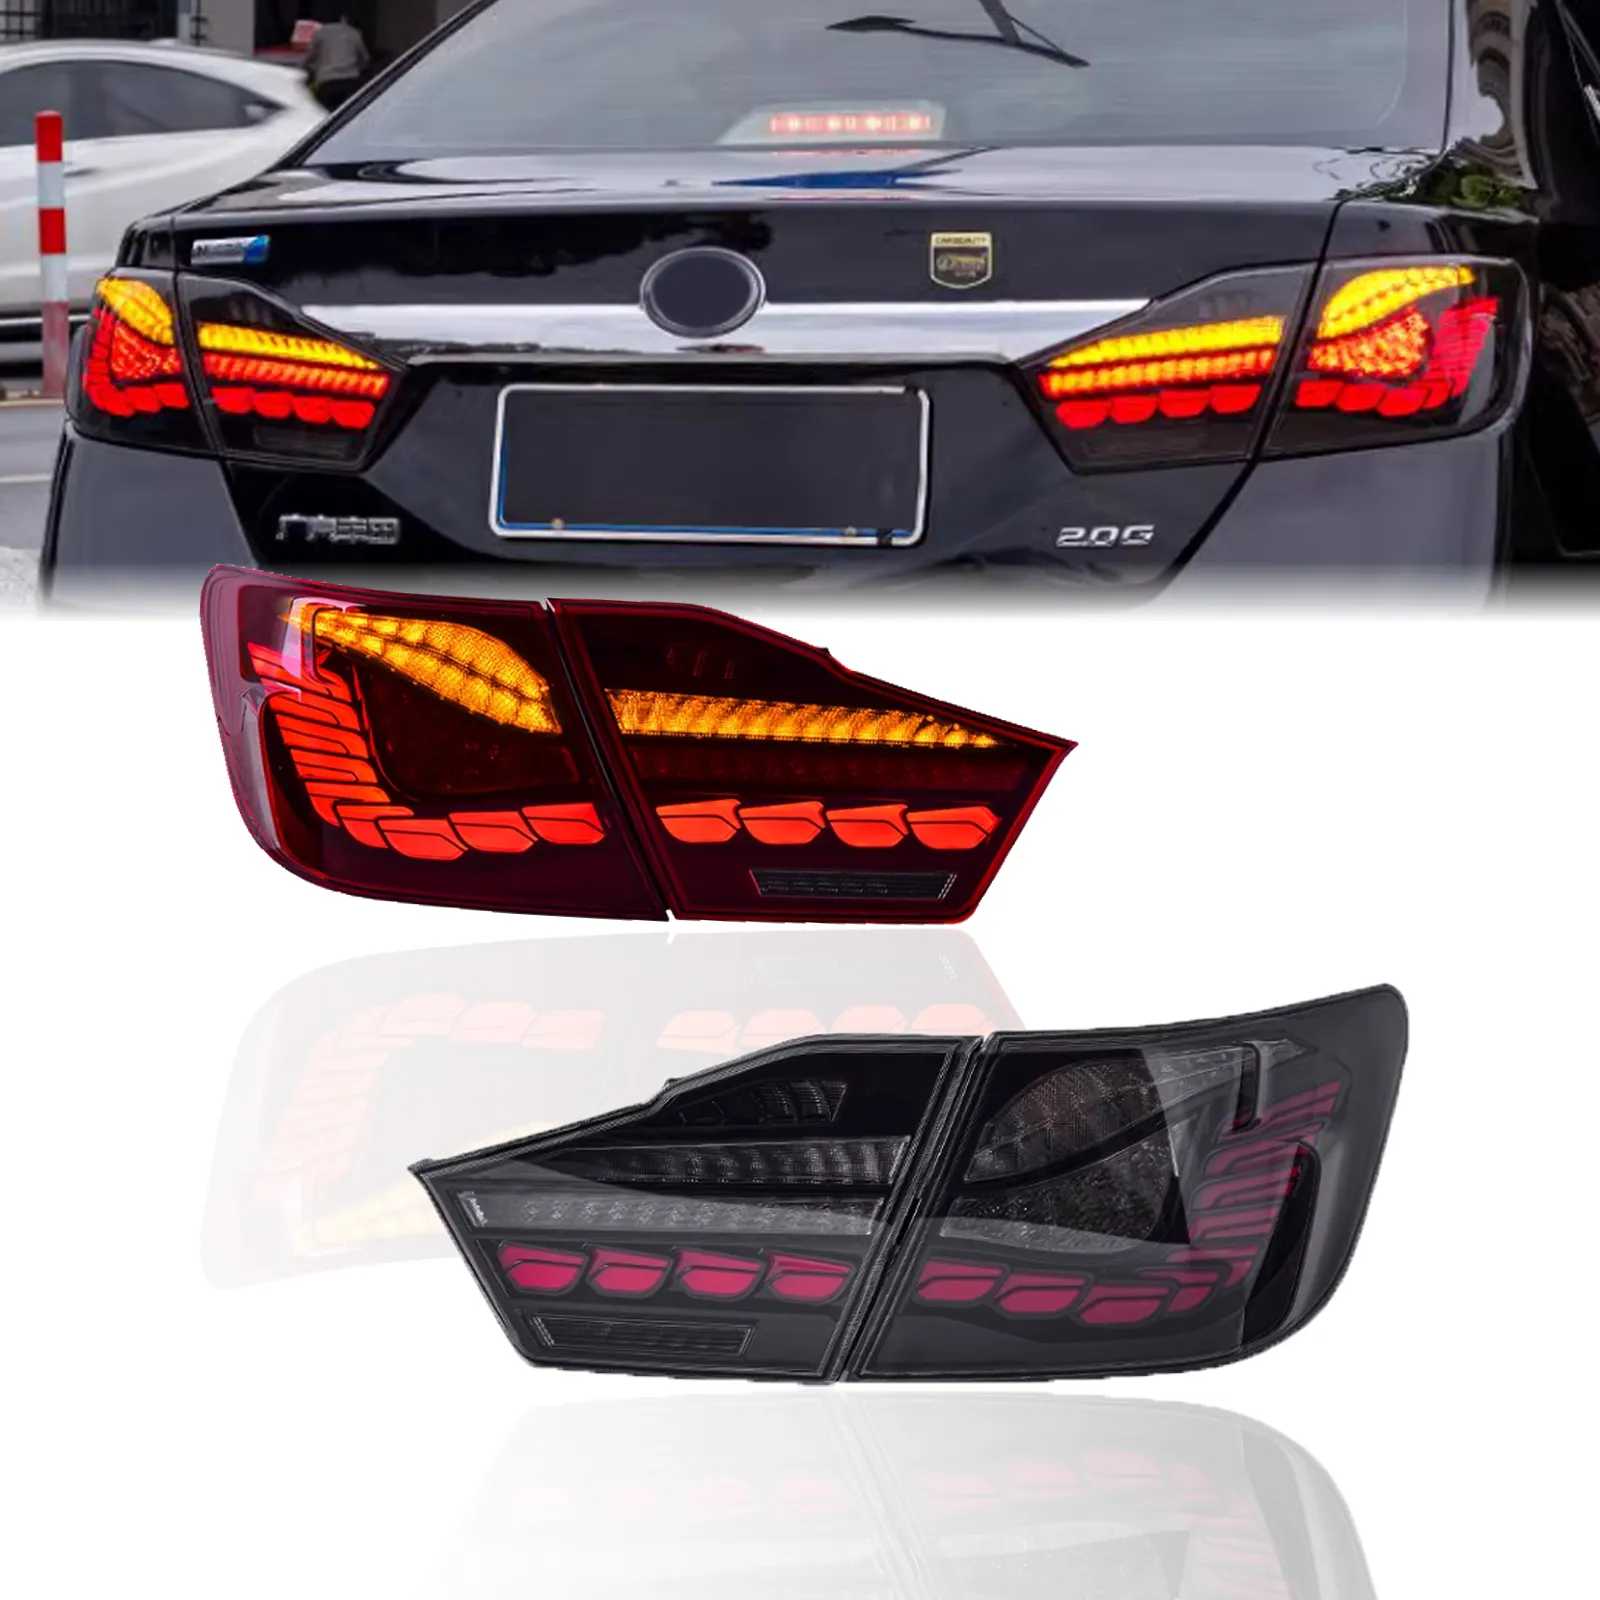 dragon scales Modified Car Tail Lamp Led Tail Light For Toyota camry 2012 2013 2014 With Running Turn Brake Reverse